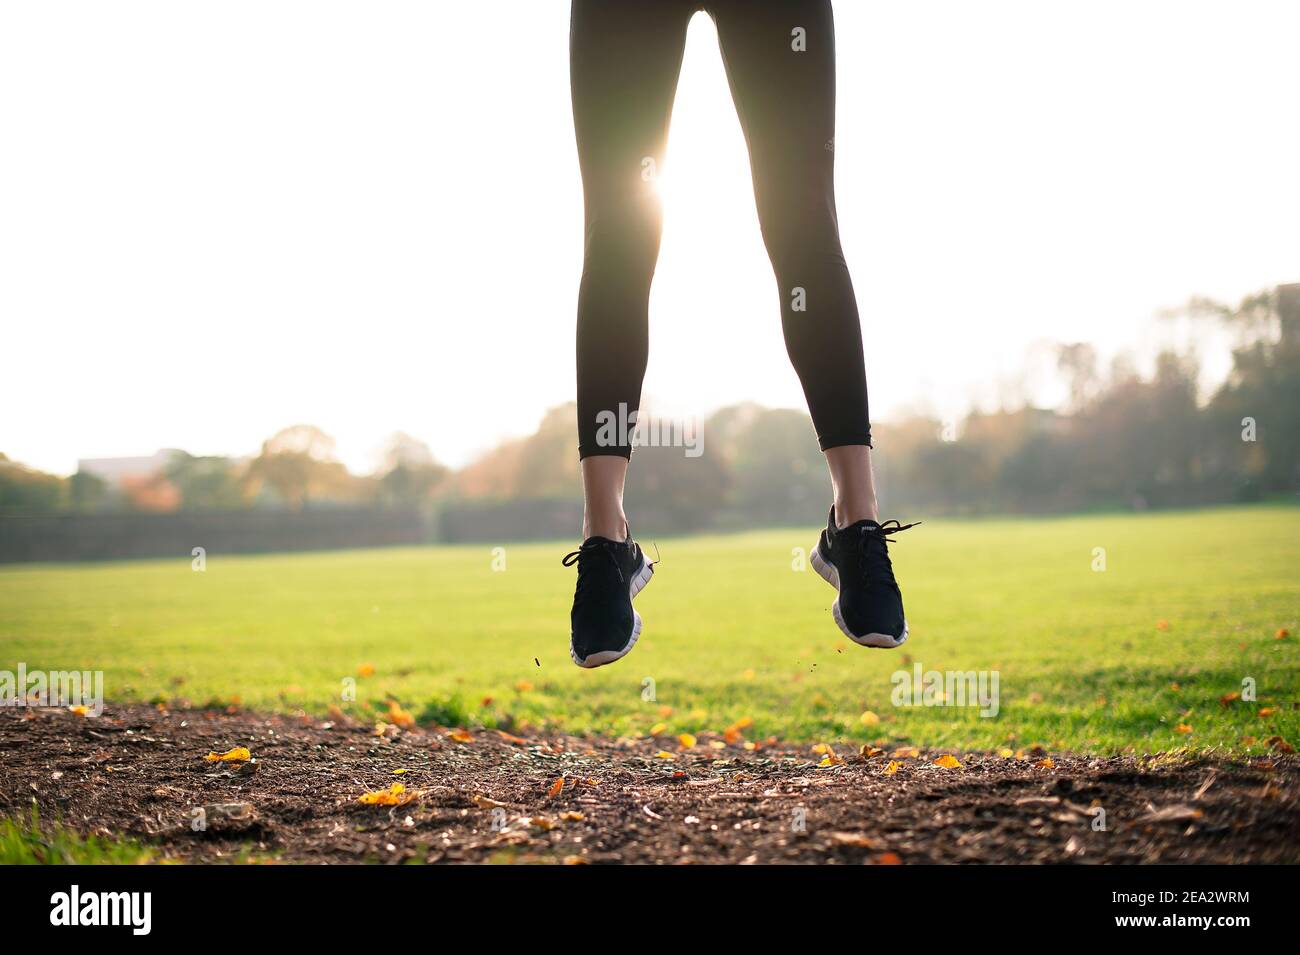 Low angle view of fit, sporty woman jumping in bright green park, close up of legs. Outdoor, active lifestyle concept. London, UK Stock Photo